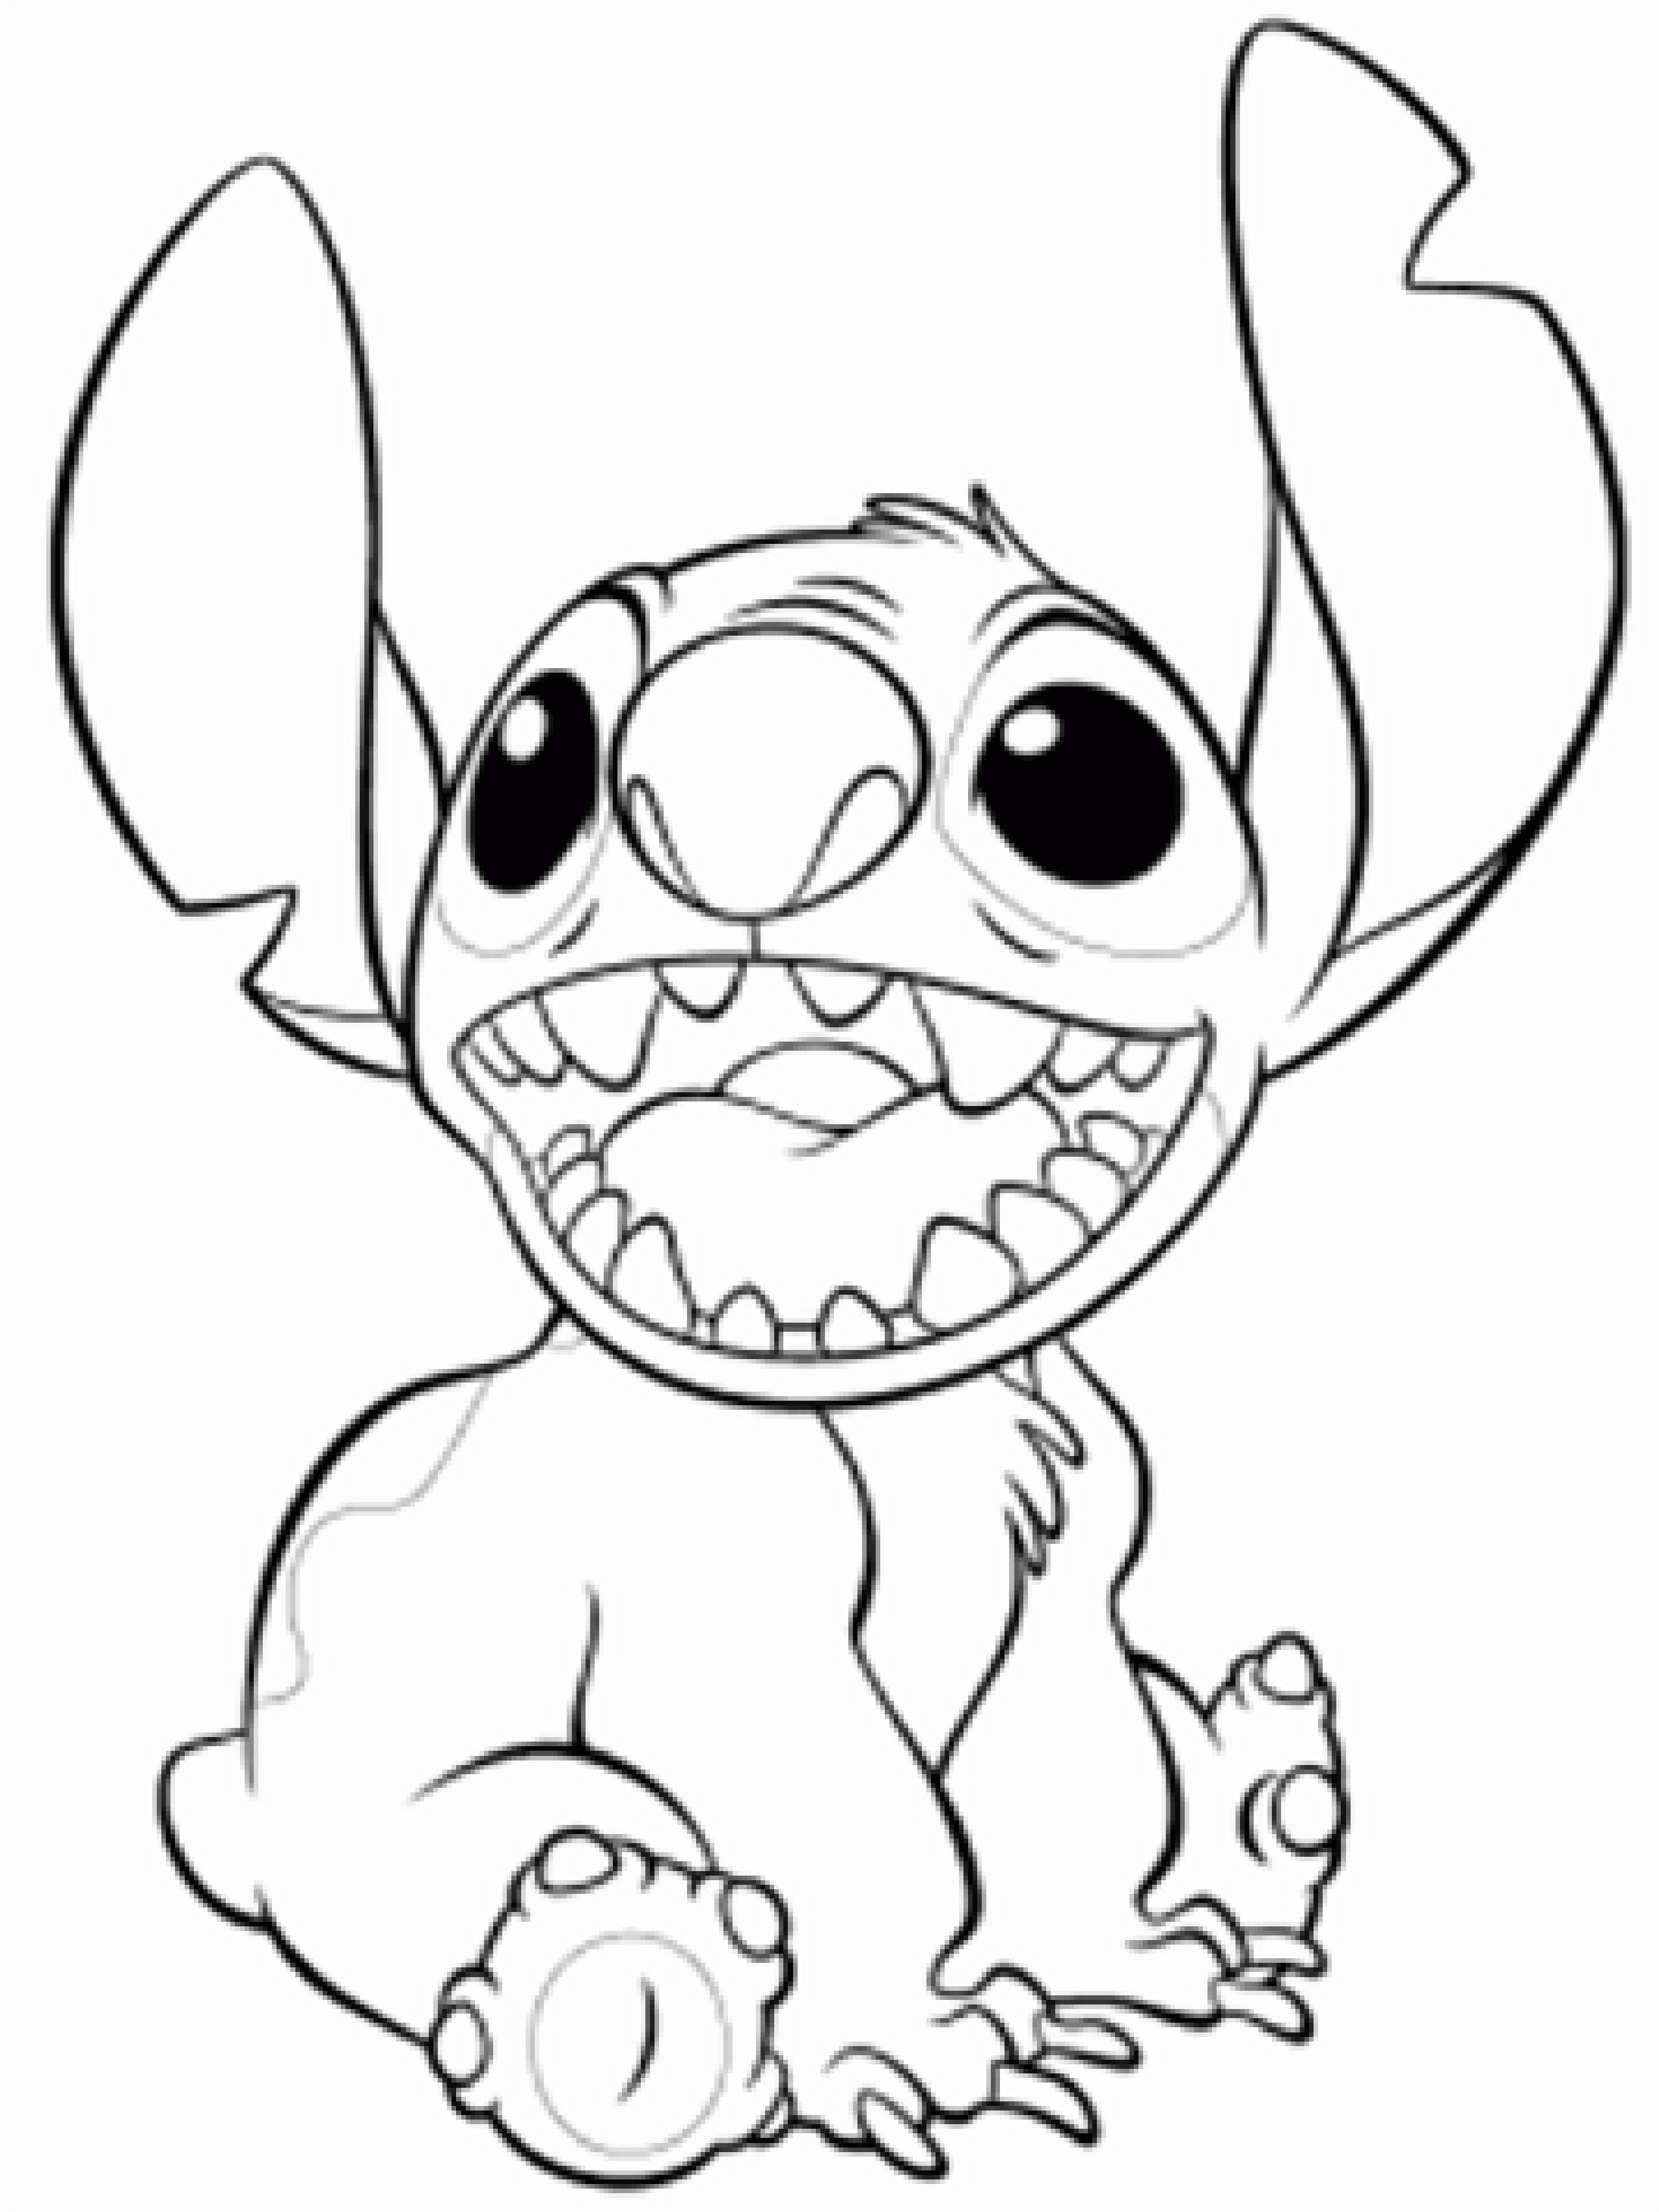 Preschoolers Cute Disney Coloring Pages To Download And Print For